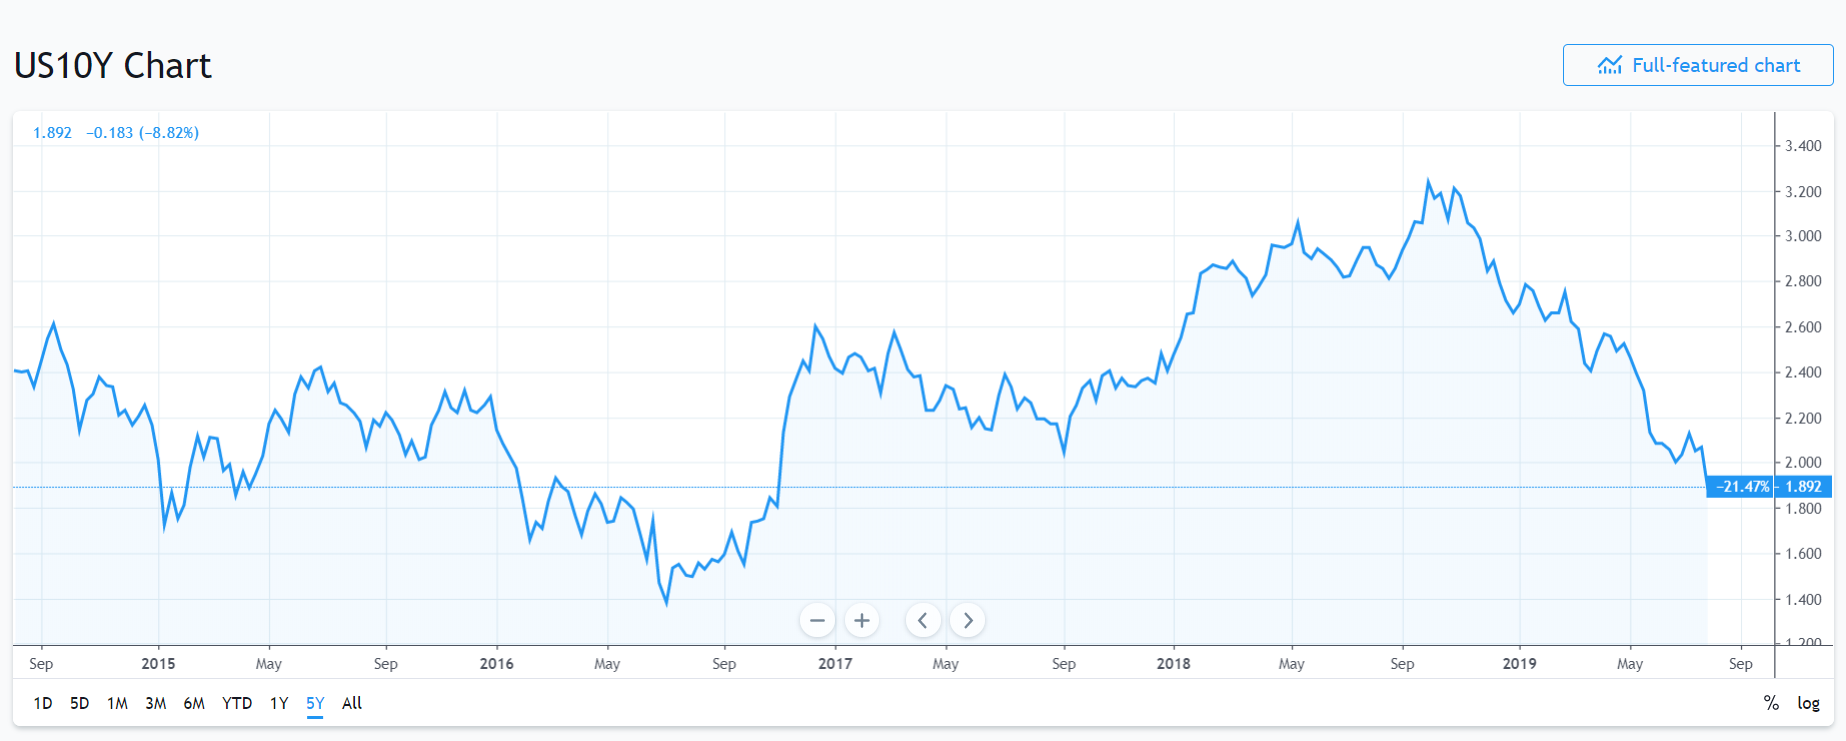 Trading View US 10-Year Bond Yield Chart - 02 August 2019